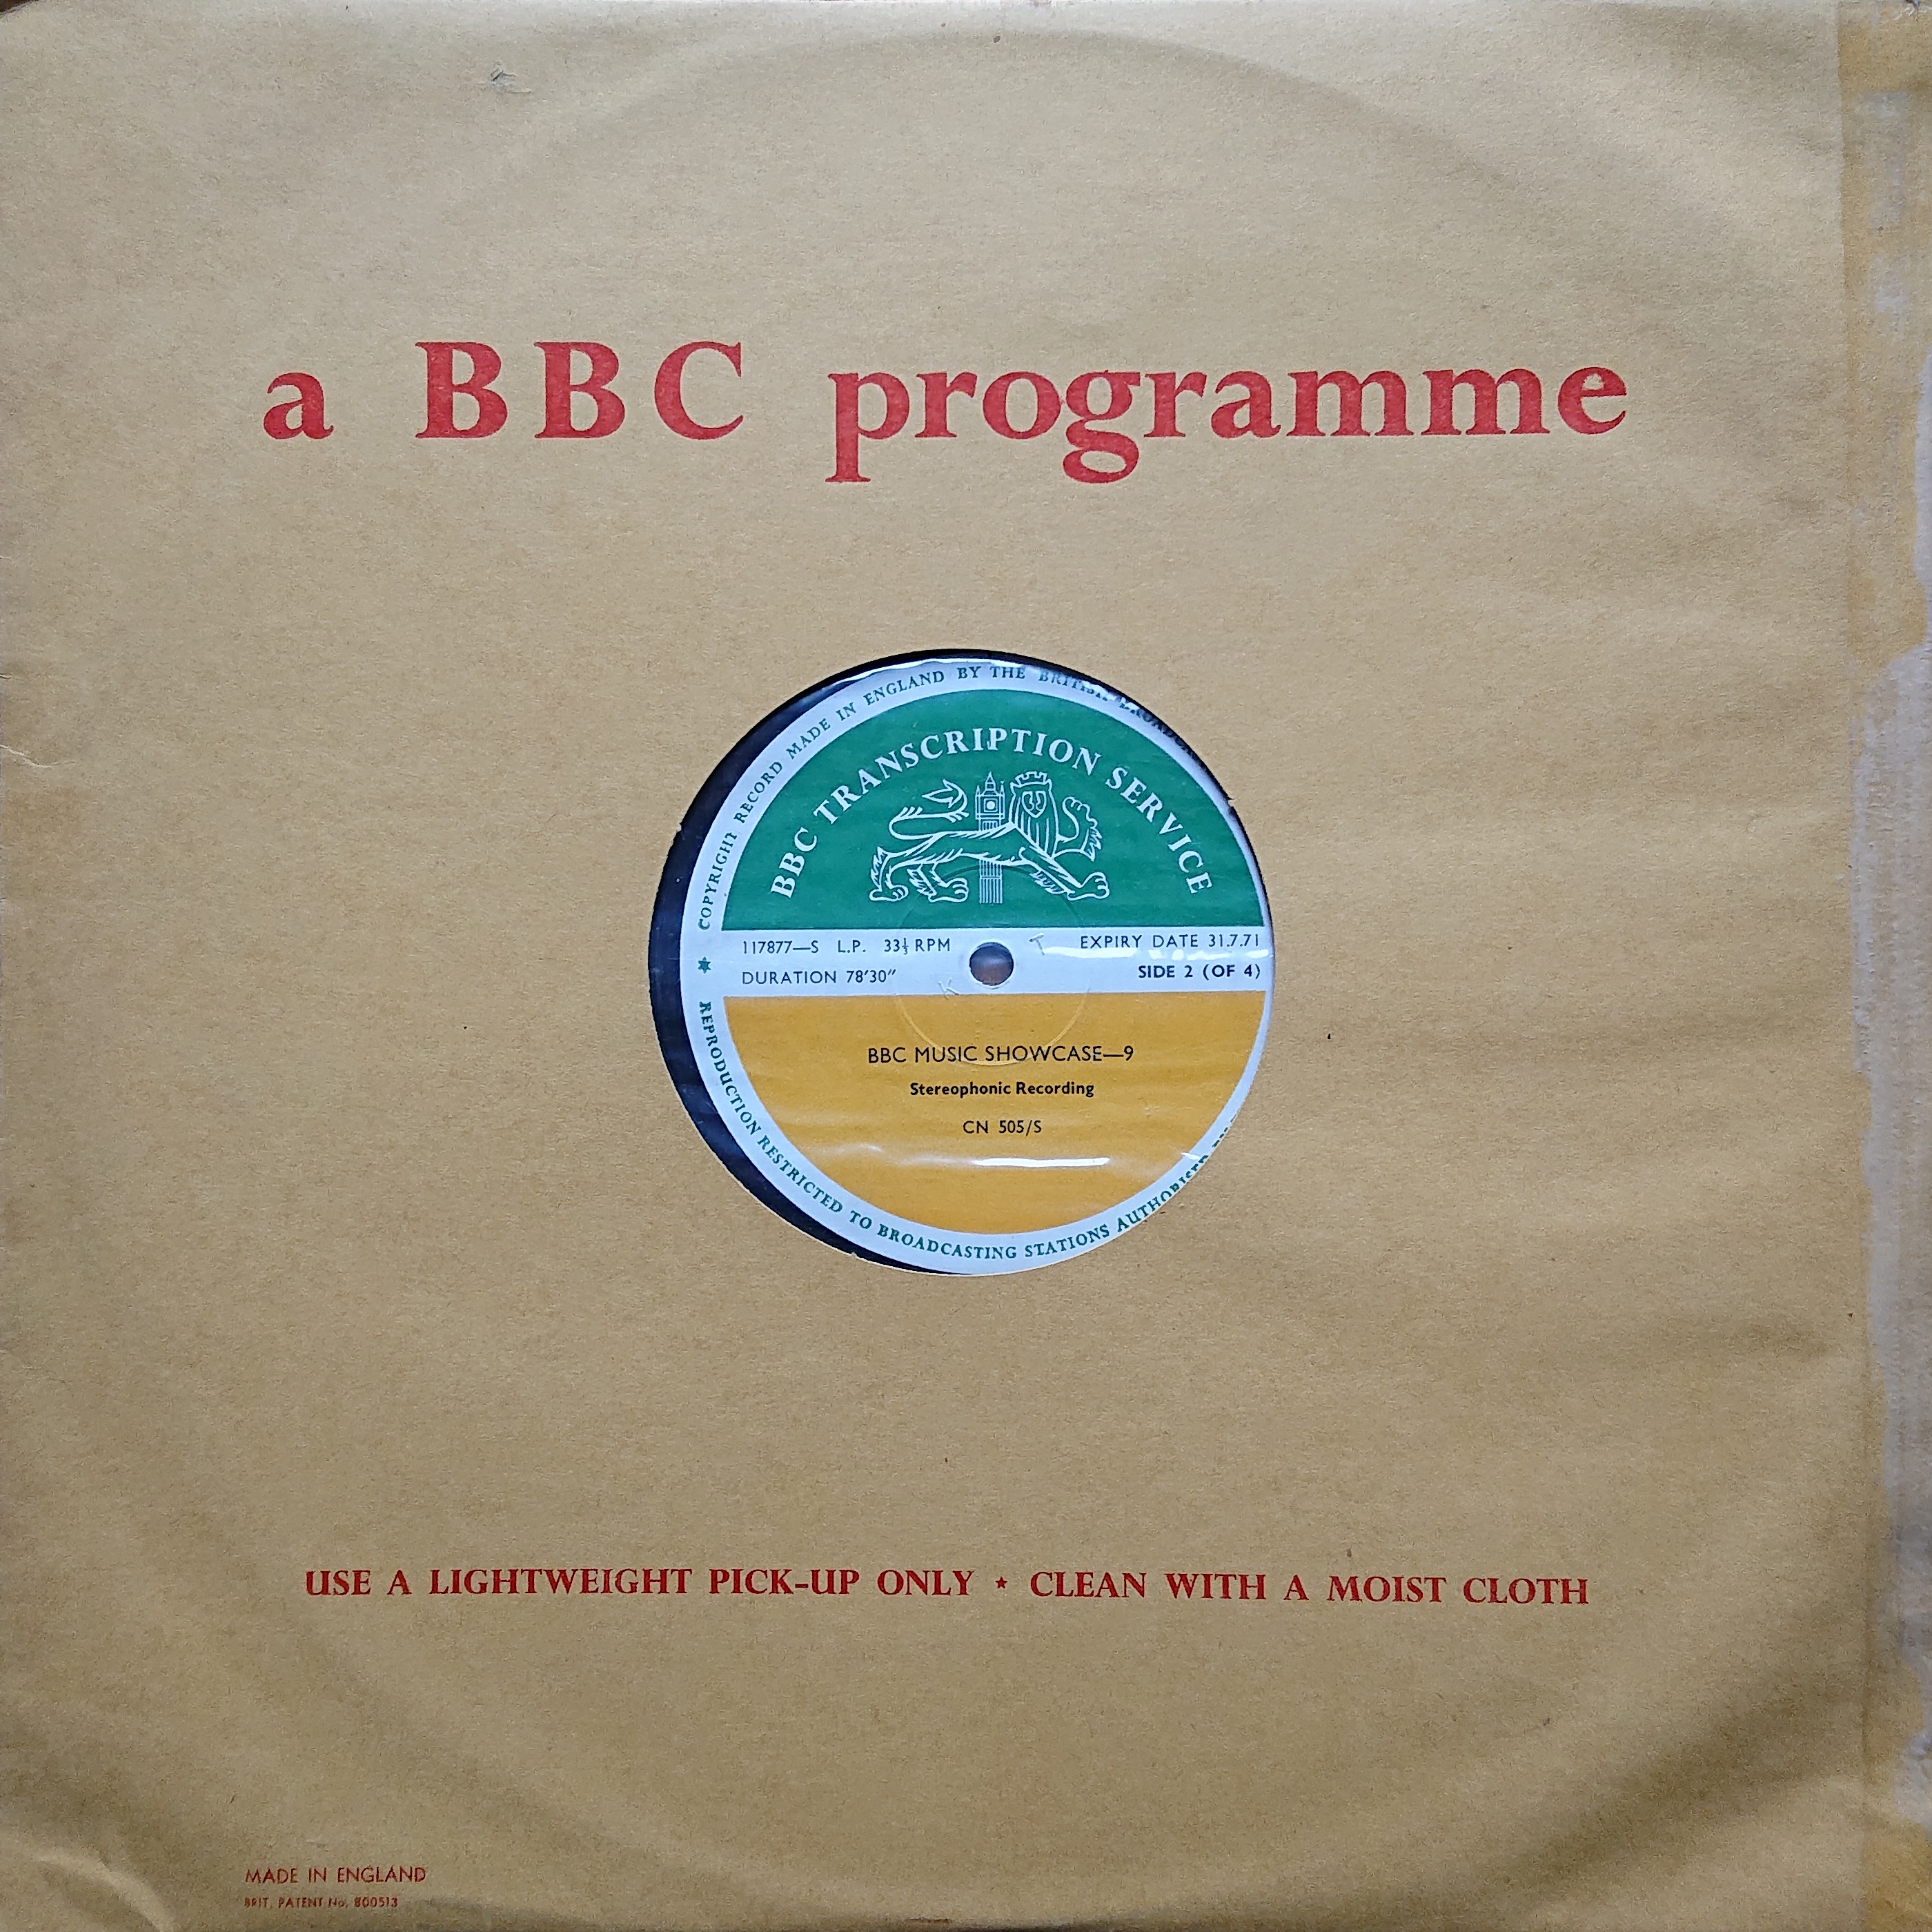 Picture of CN 505 S 18 BBC music showcase - 9 (Sides 2 & 4) by artist Various from the BBC records and Tapes library